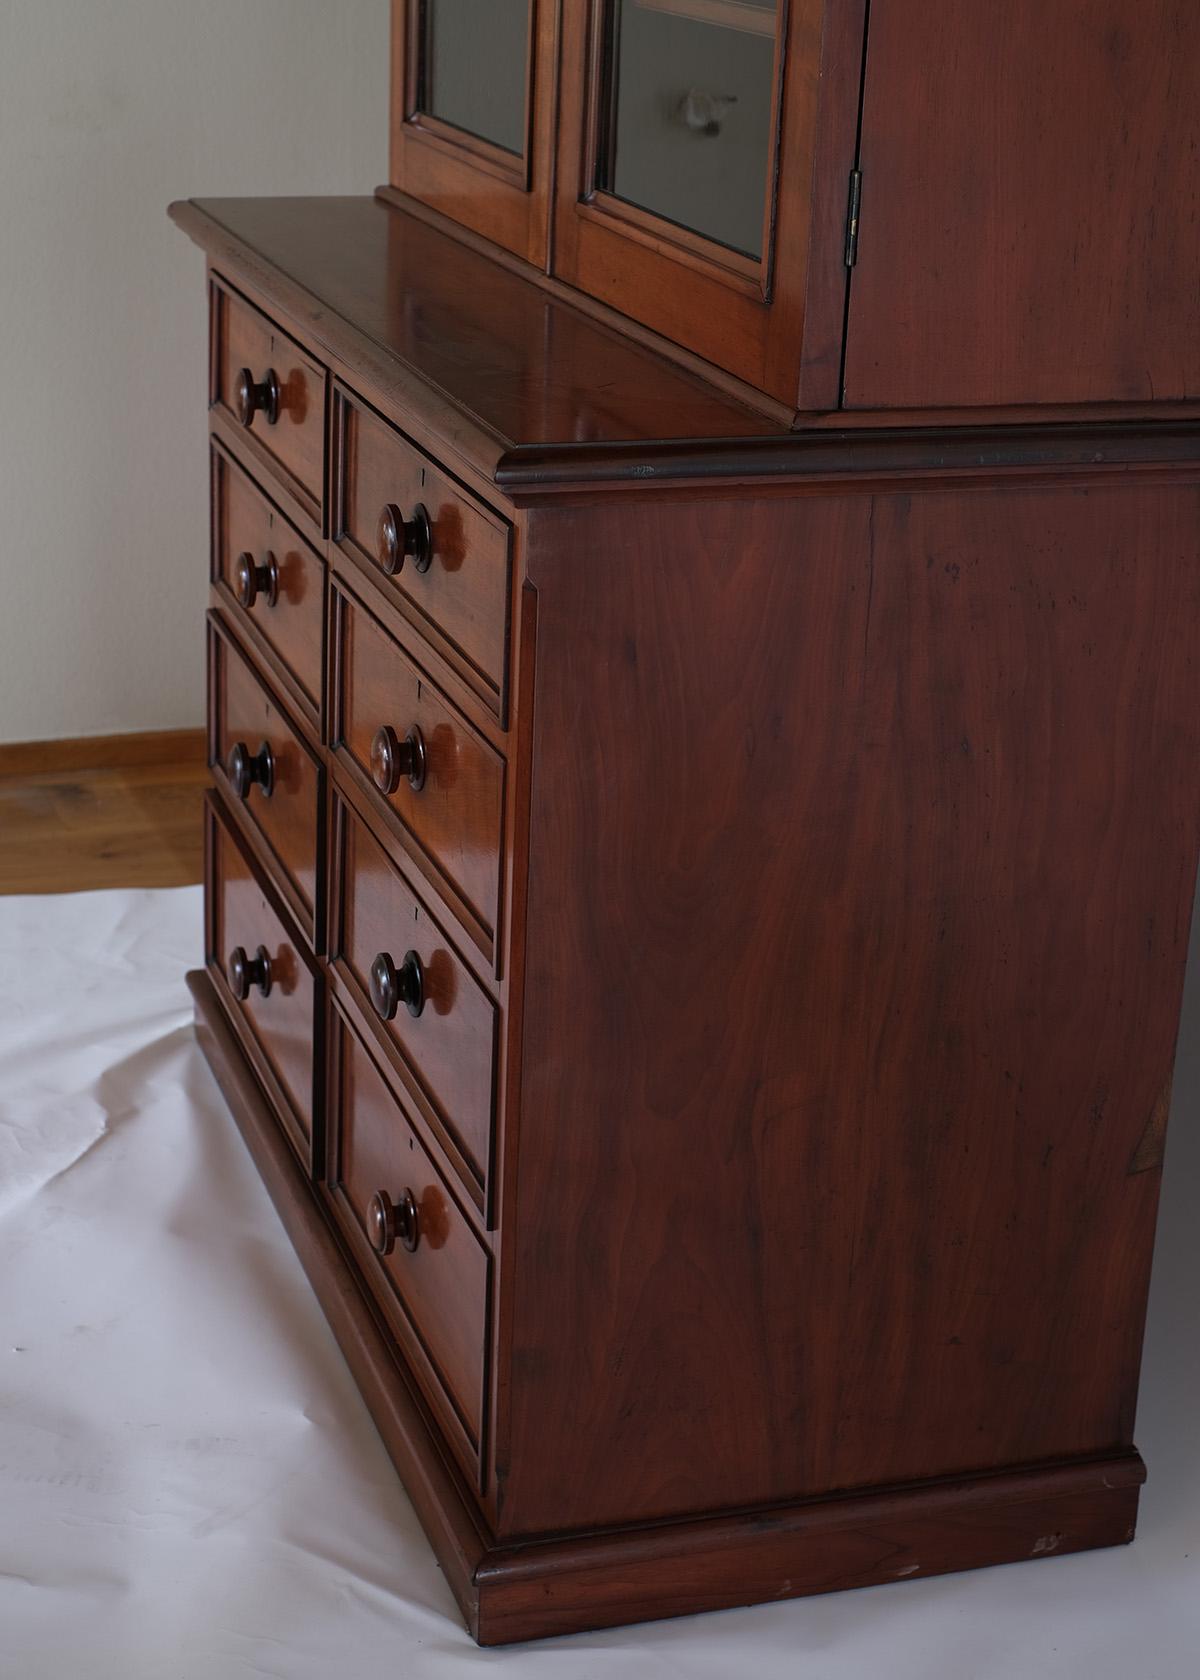 Mahogany Cabinet with Original Glass, Circa 1920s

Step back in time with this charming mahogany cabinet dating back to the 1920s. Adorned with original glass, it adds a touch of vintage elegance to any space. Well-preserved and in great condition,